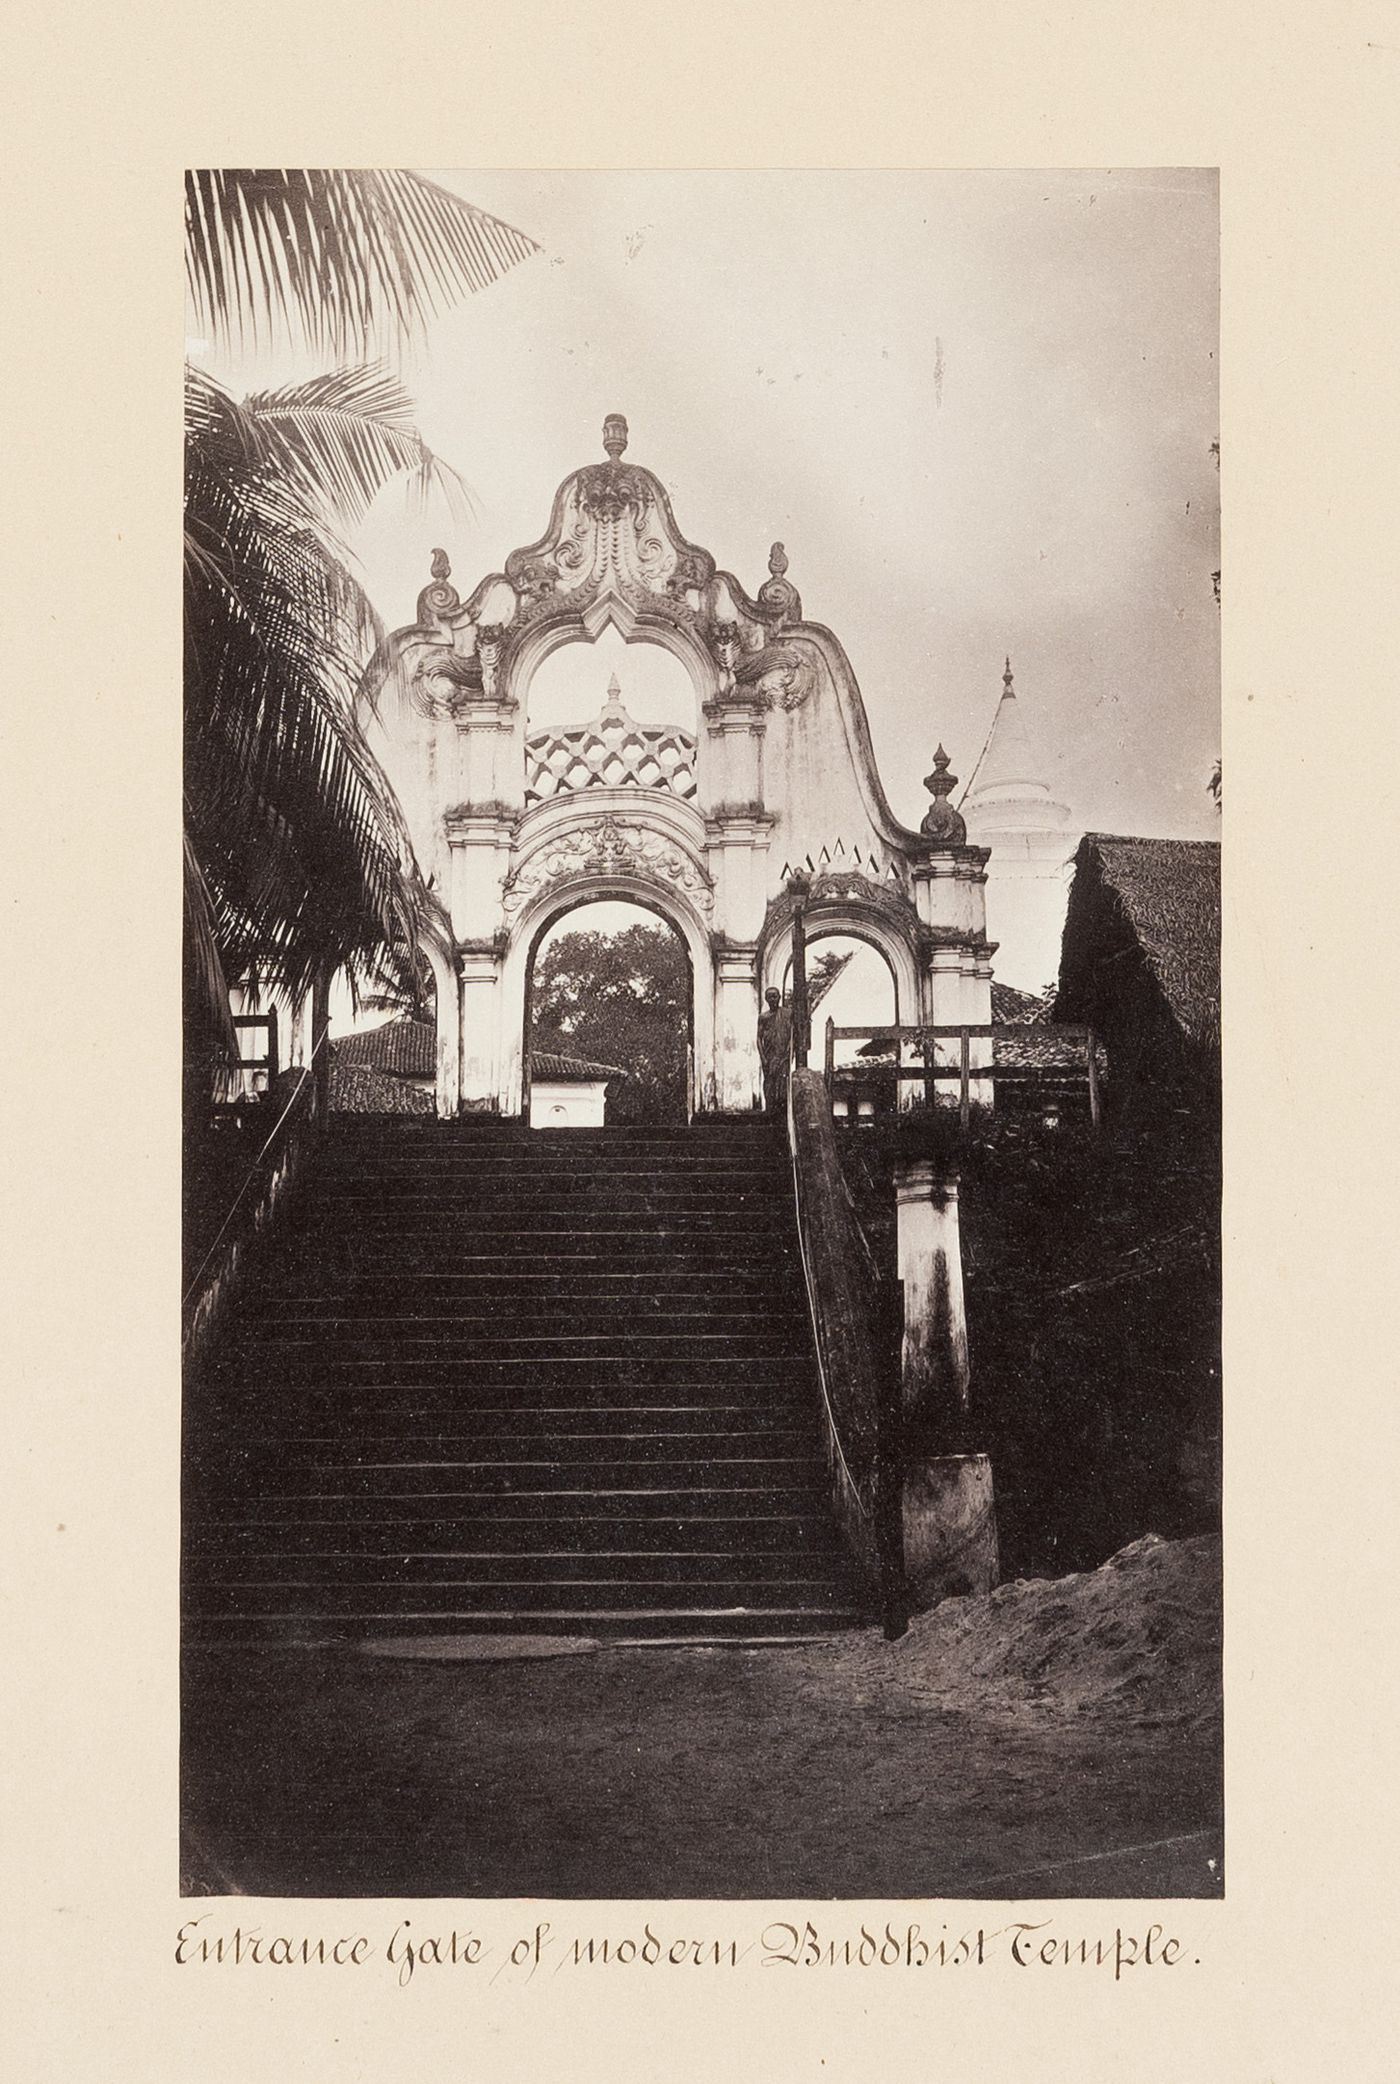 View of a staircase and the entrance gate of a Buddhist temple, near Colombo, Ceylon (now Sri Lanka)